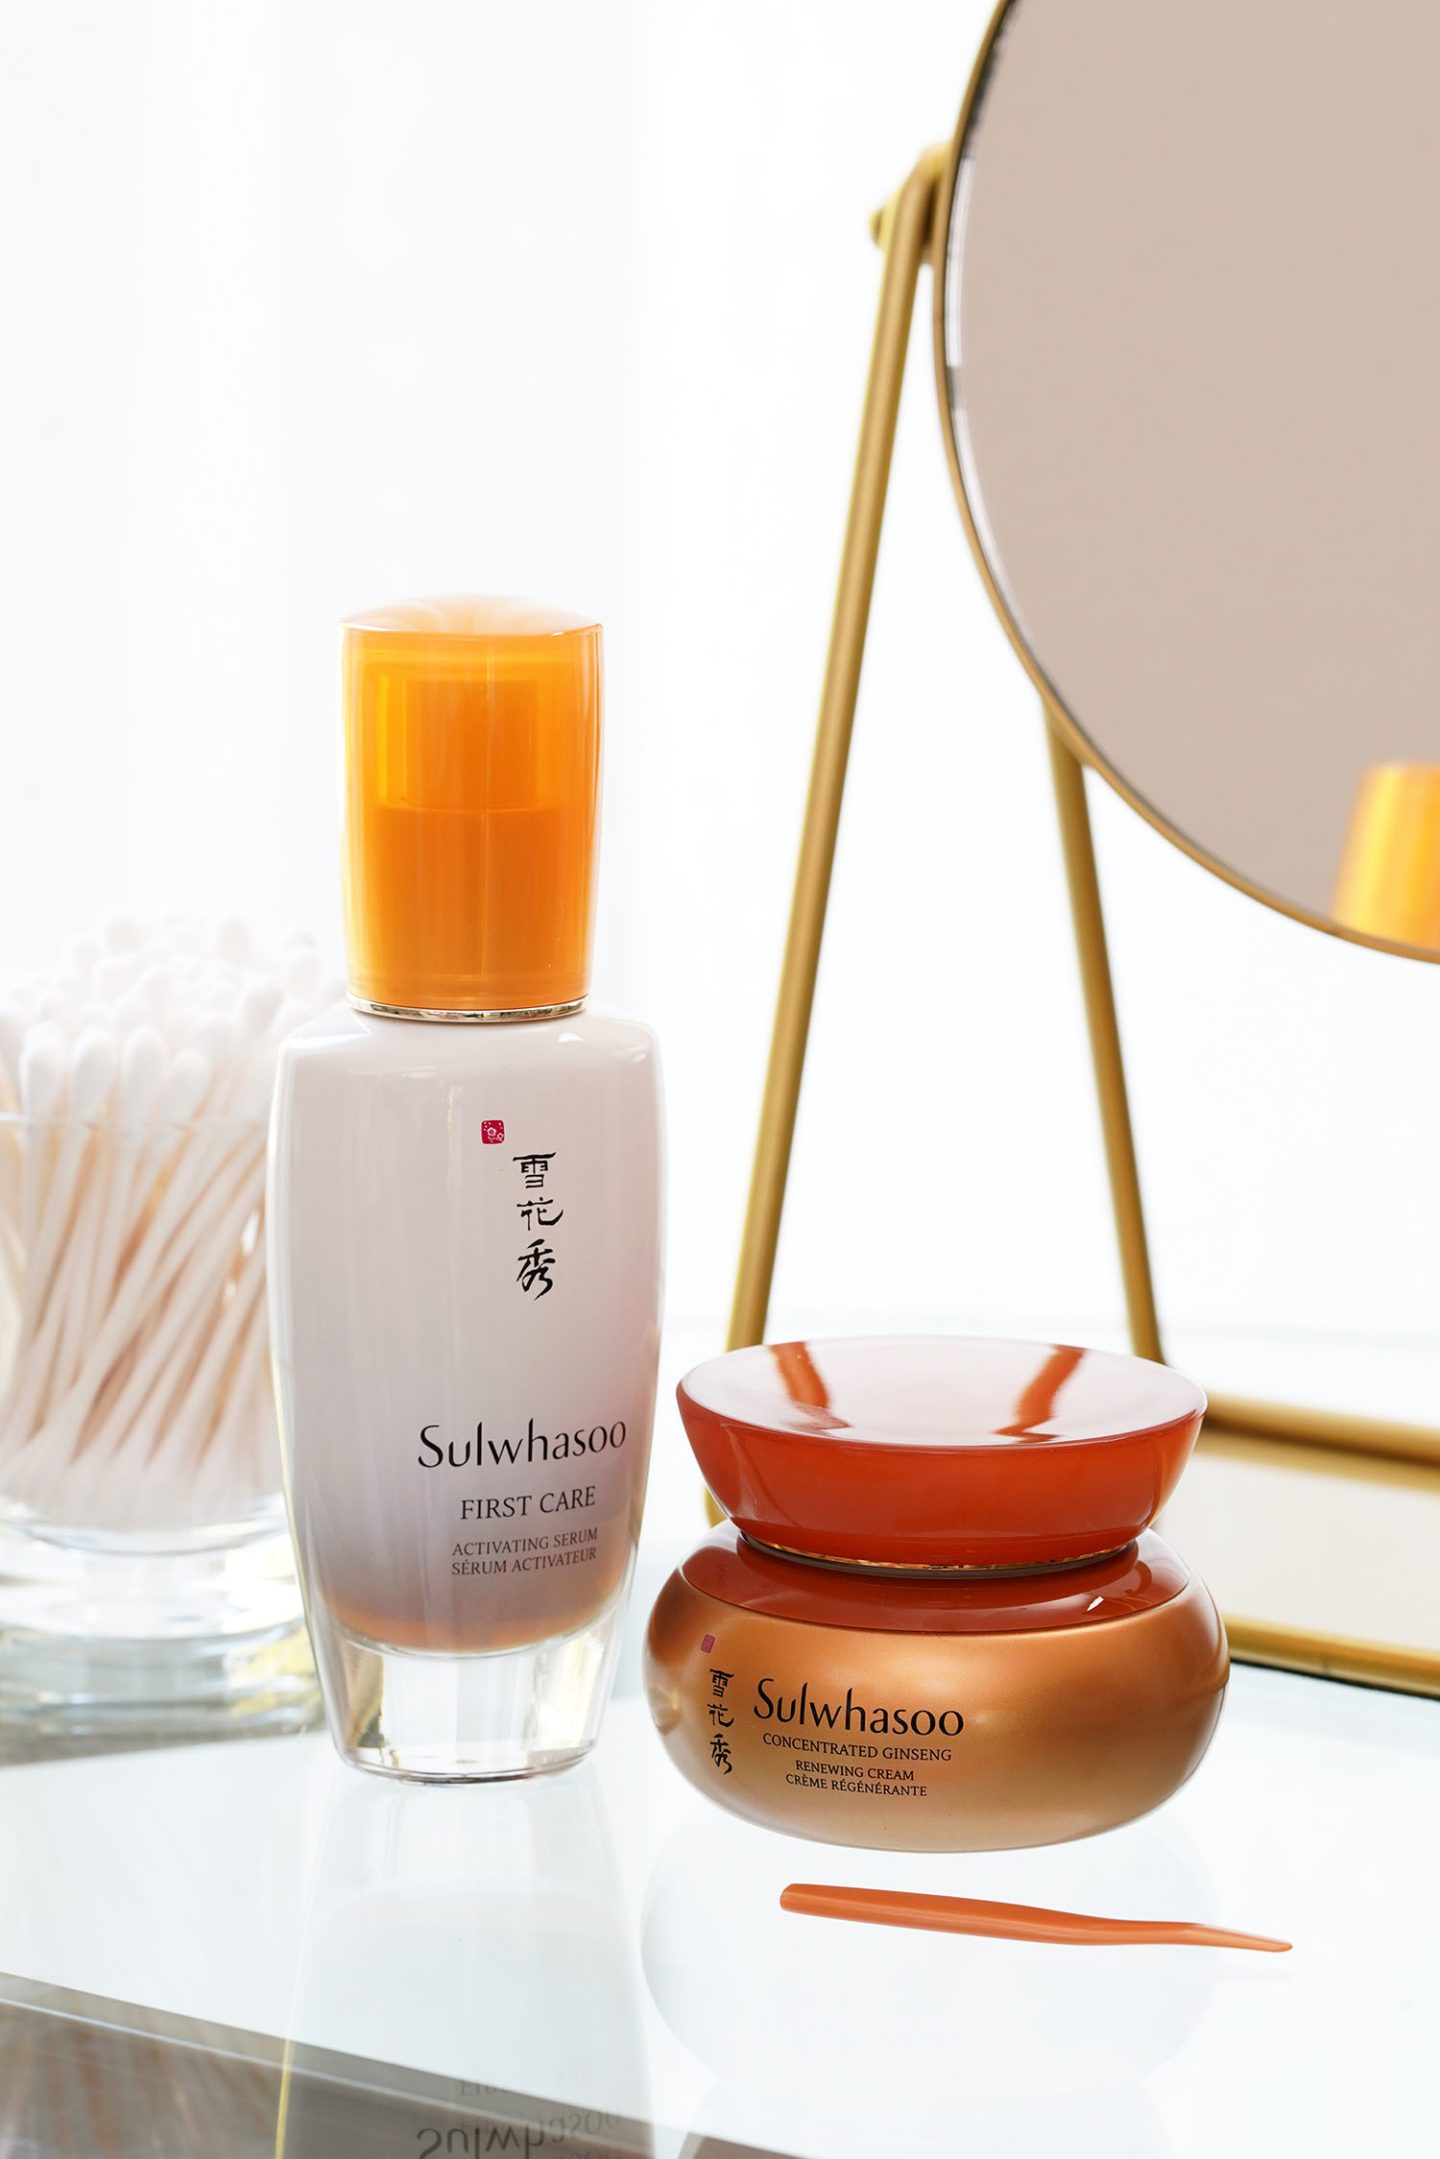 Sulwhasoo First Care Activating Serum and Concentrated Ginseng Renewing Cream review